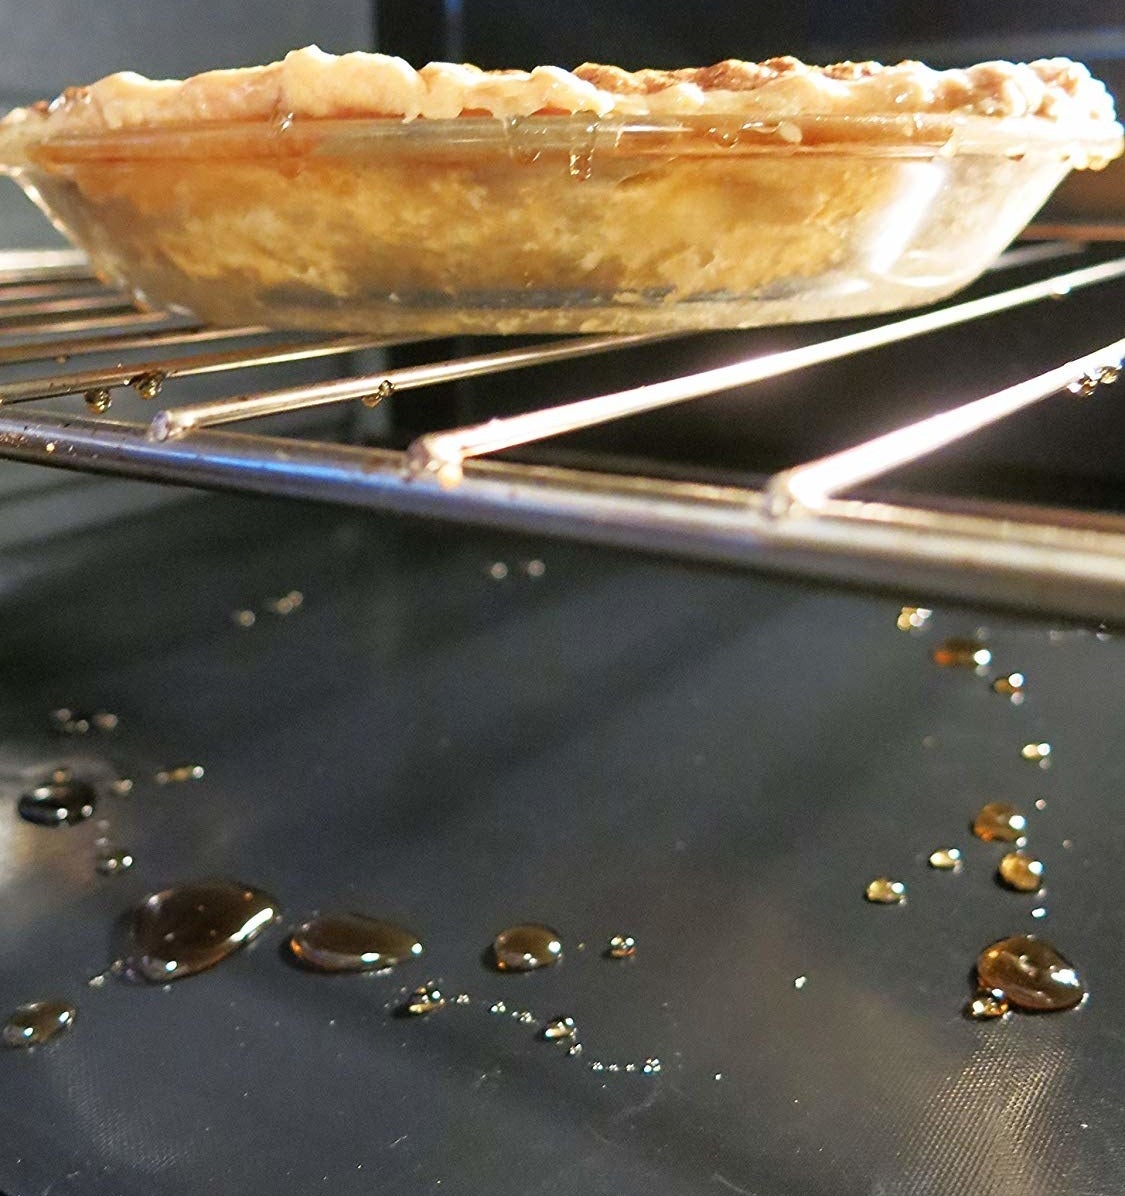 Pie dripping onto oven liners 